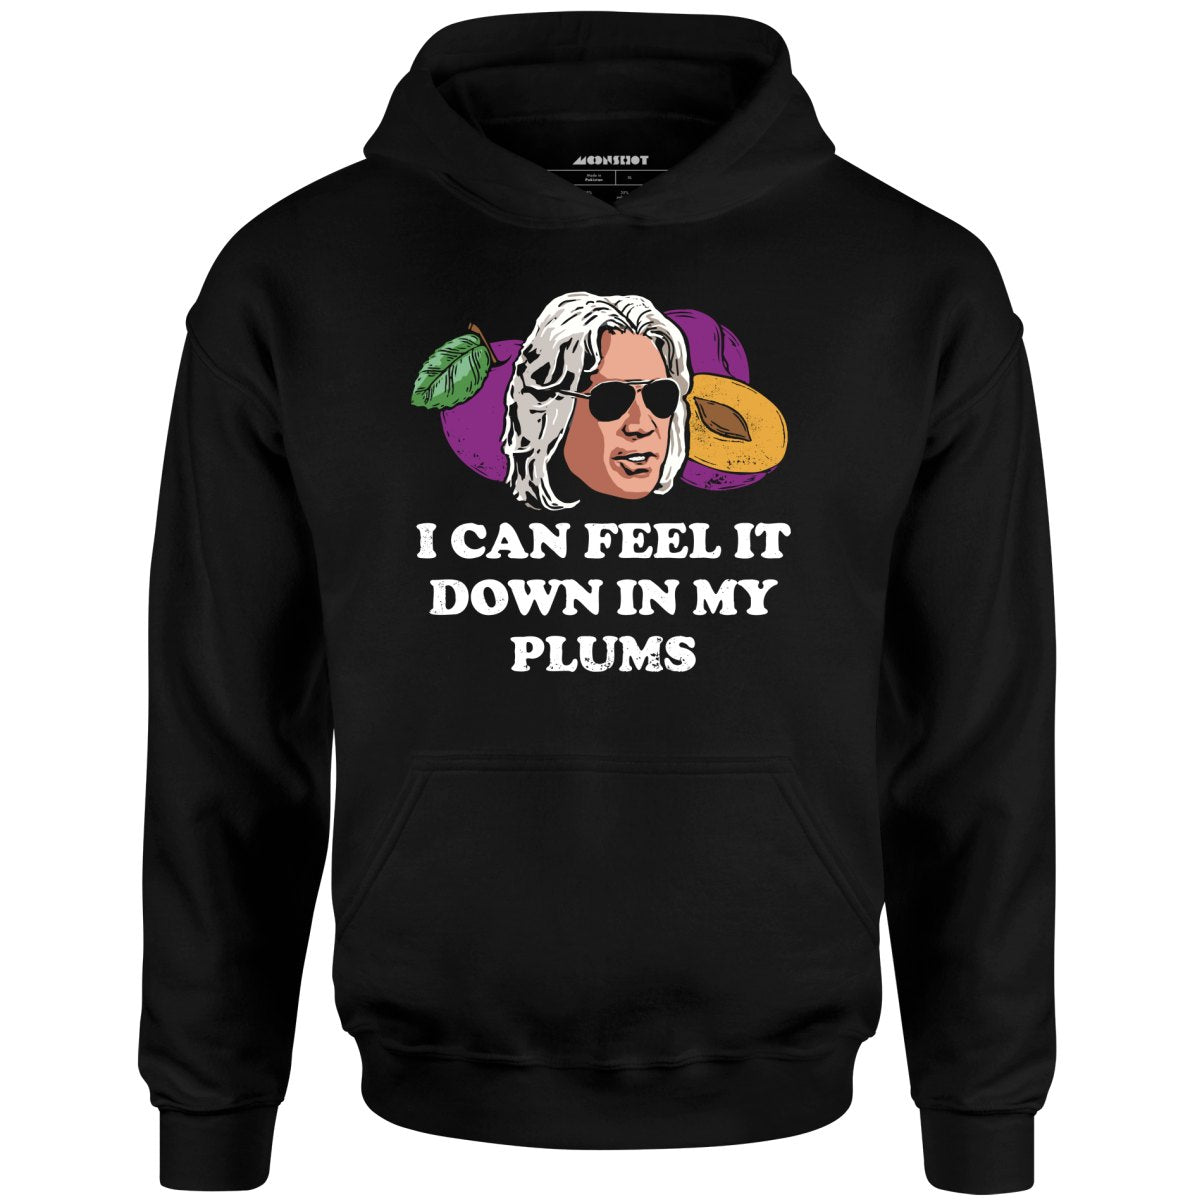 I Can Feel it Down in My Plums - Unisex Hoodie